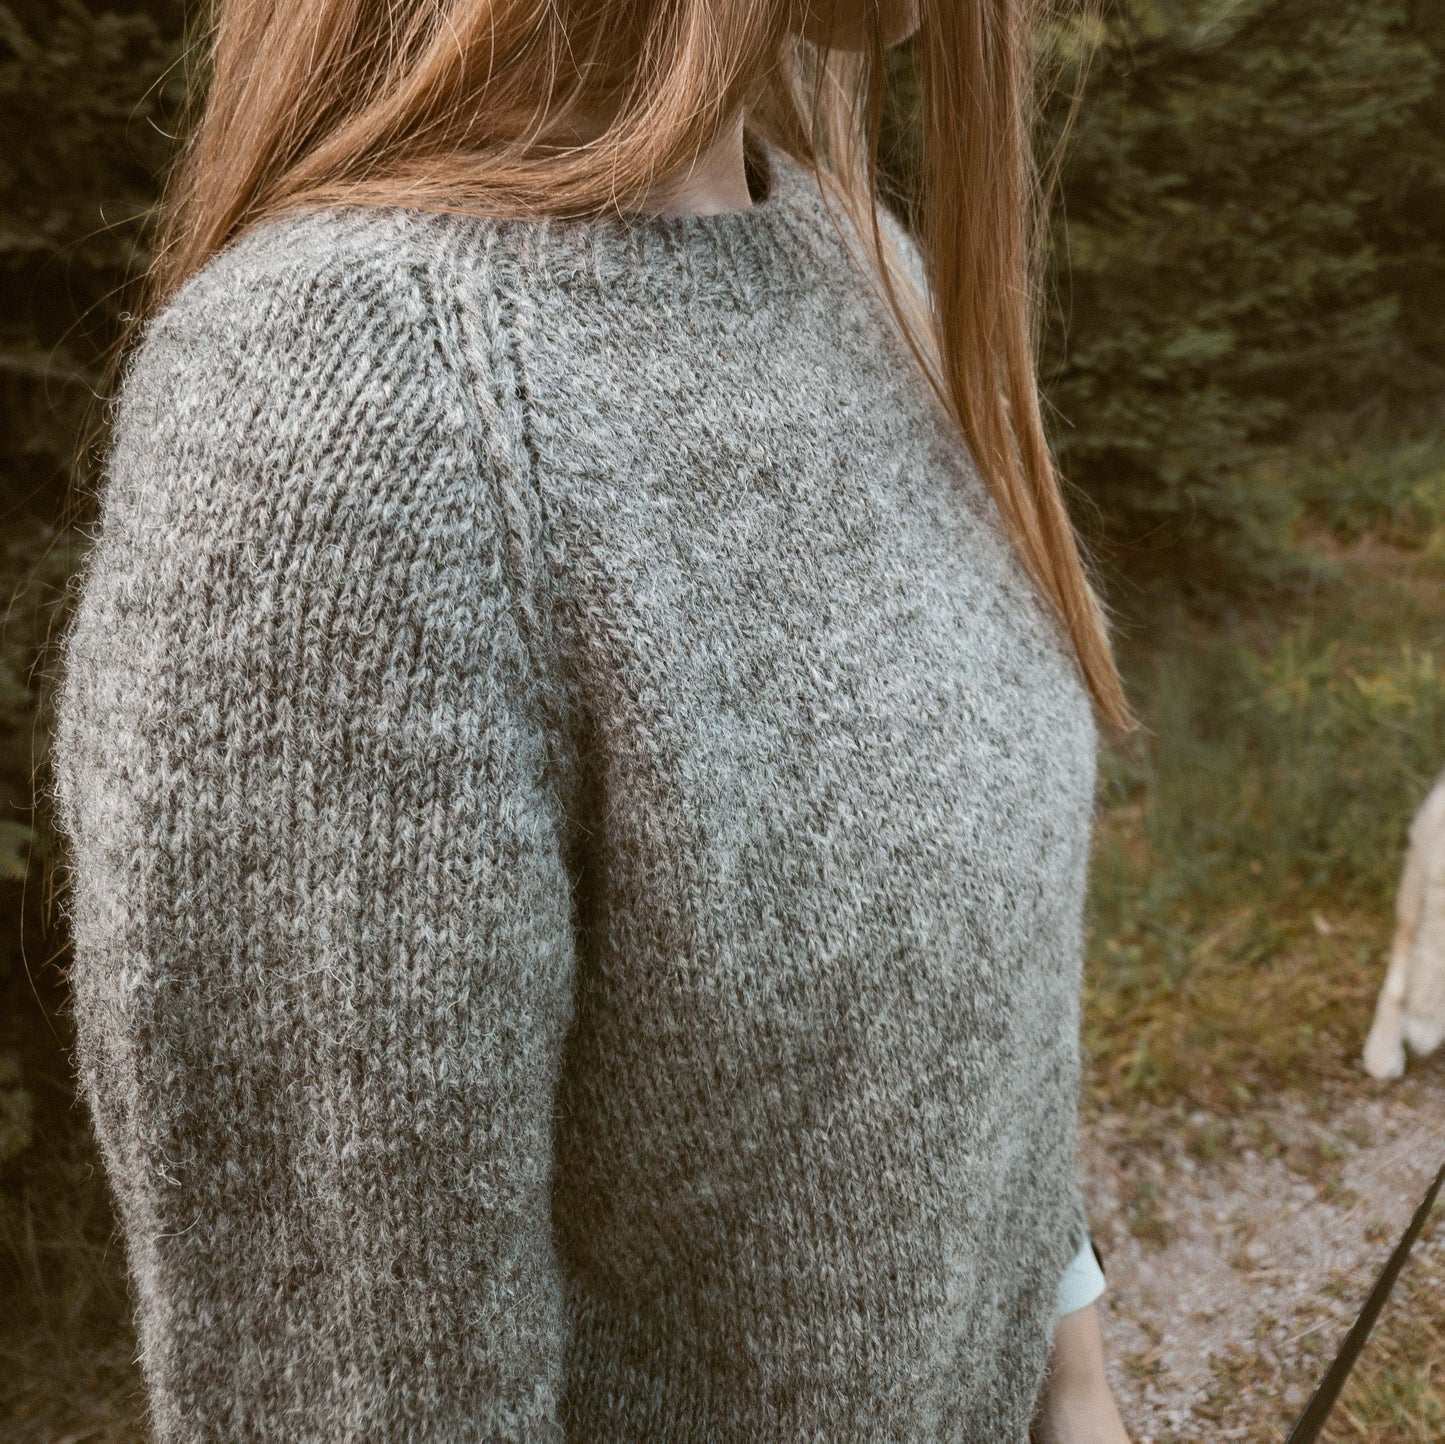 Close-up shot of the Wullpullover sweater handknit in Pommernglück from Calling Sheep, highlighting the front and shoulder detail with an intricate crochet braid.